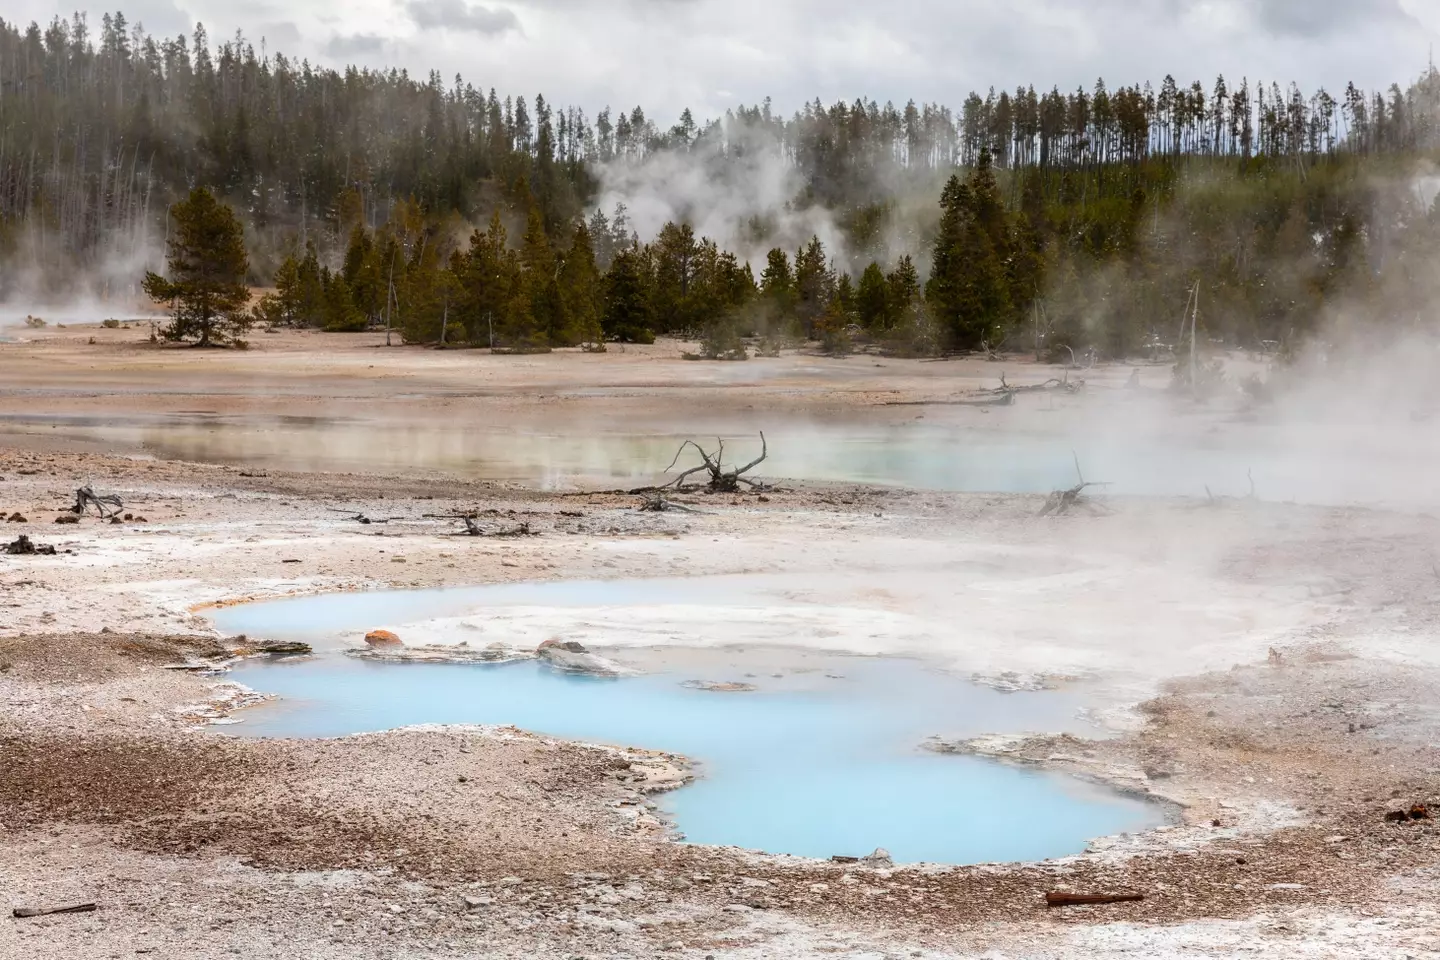 Yellowstone is known for its wildlife, geothermal geysers and surprisingly disturbing legal loopholes.